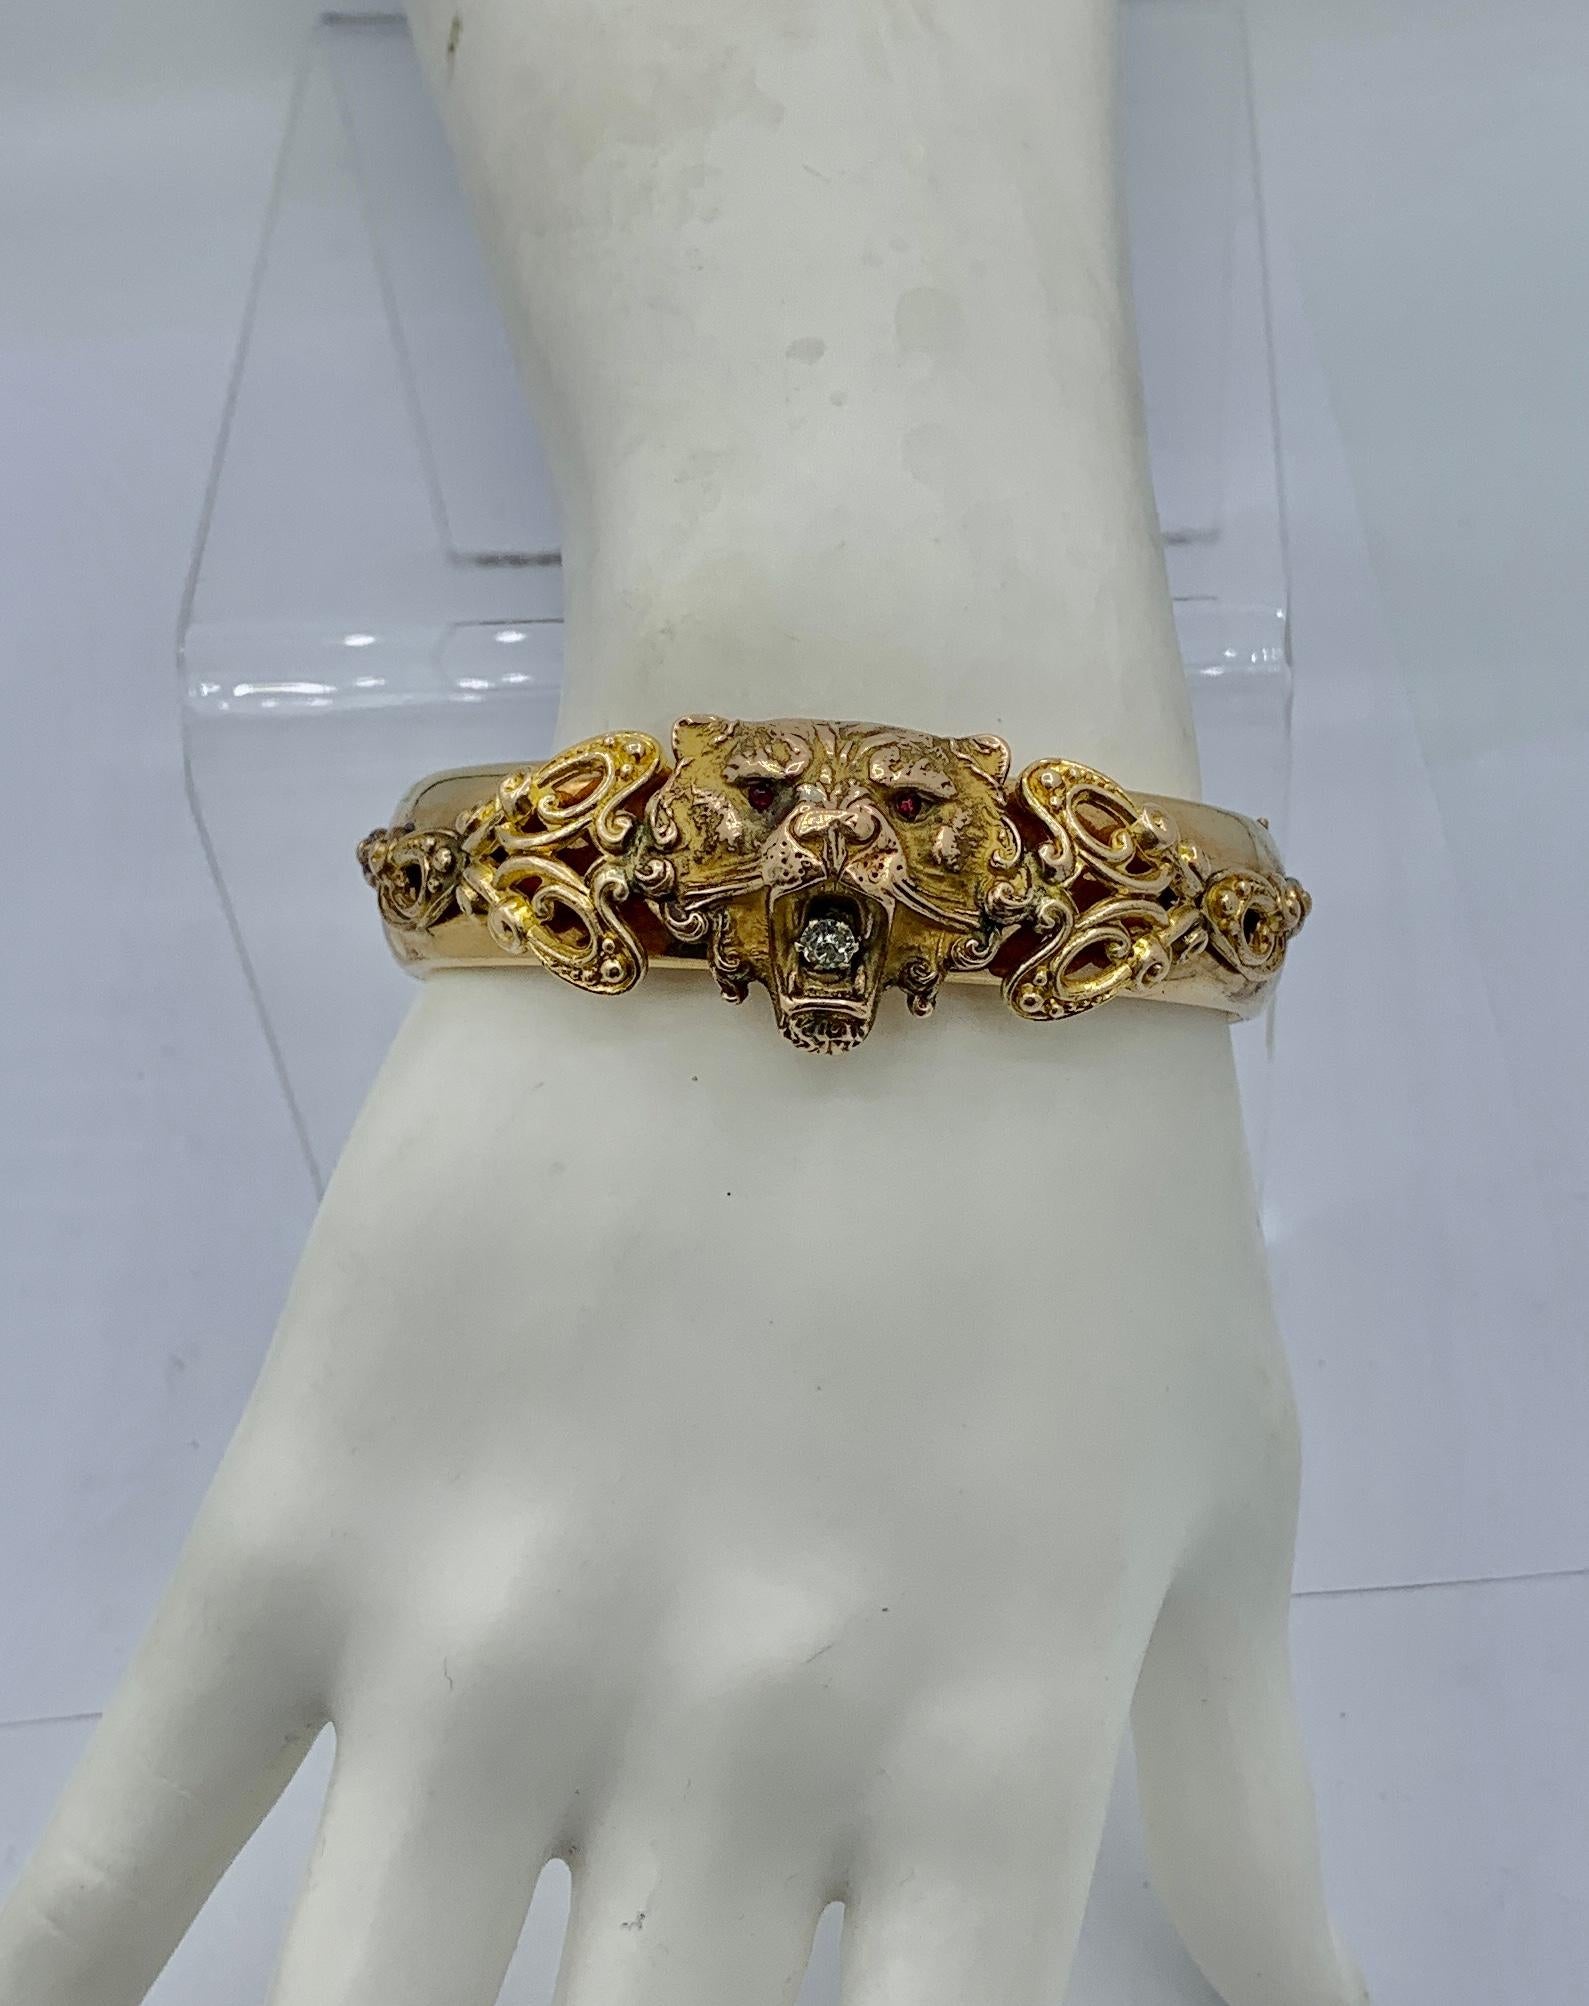 This is a spectacular antique Gold Filled Victorian - Art Nouveau lion, panther, leopard or tiger Bangle Bracelet.  The bracelet has extraordinary three-dimensional design with its fantastic lion head and beautiful applied scroll work.  The bracelet